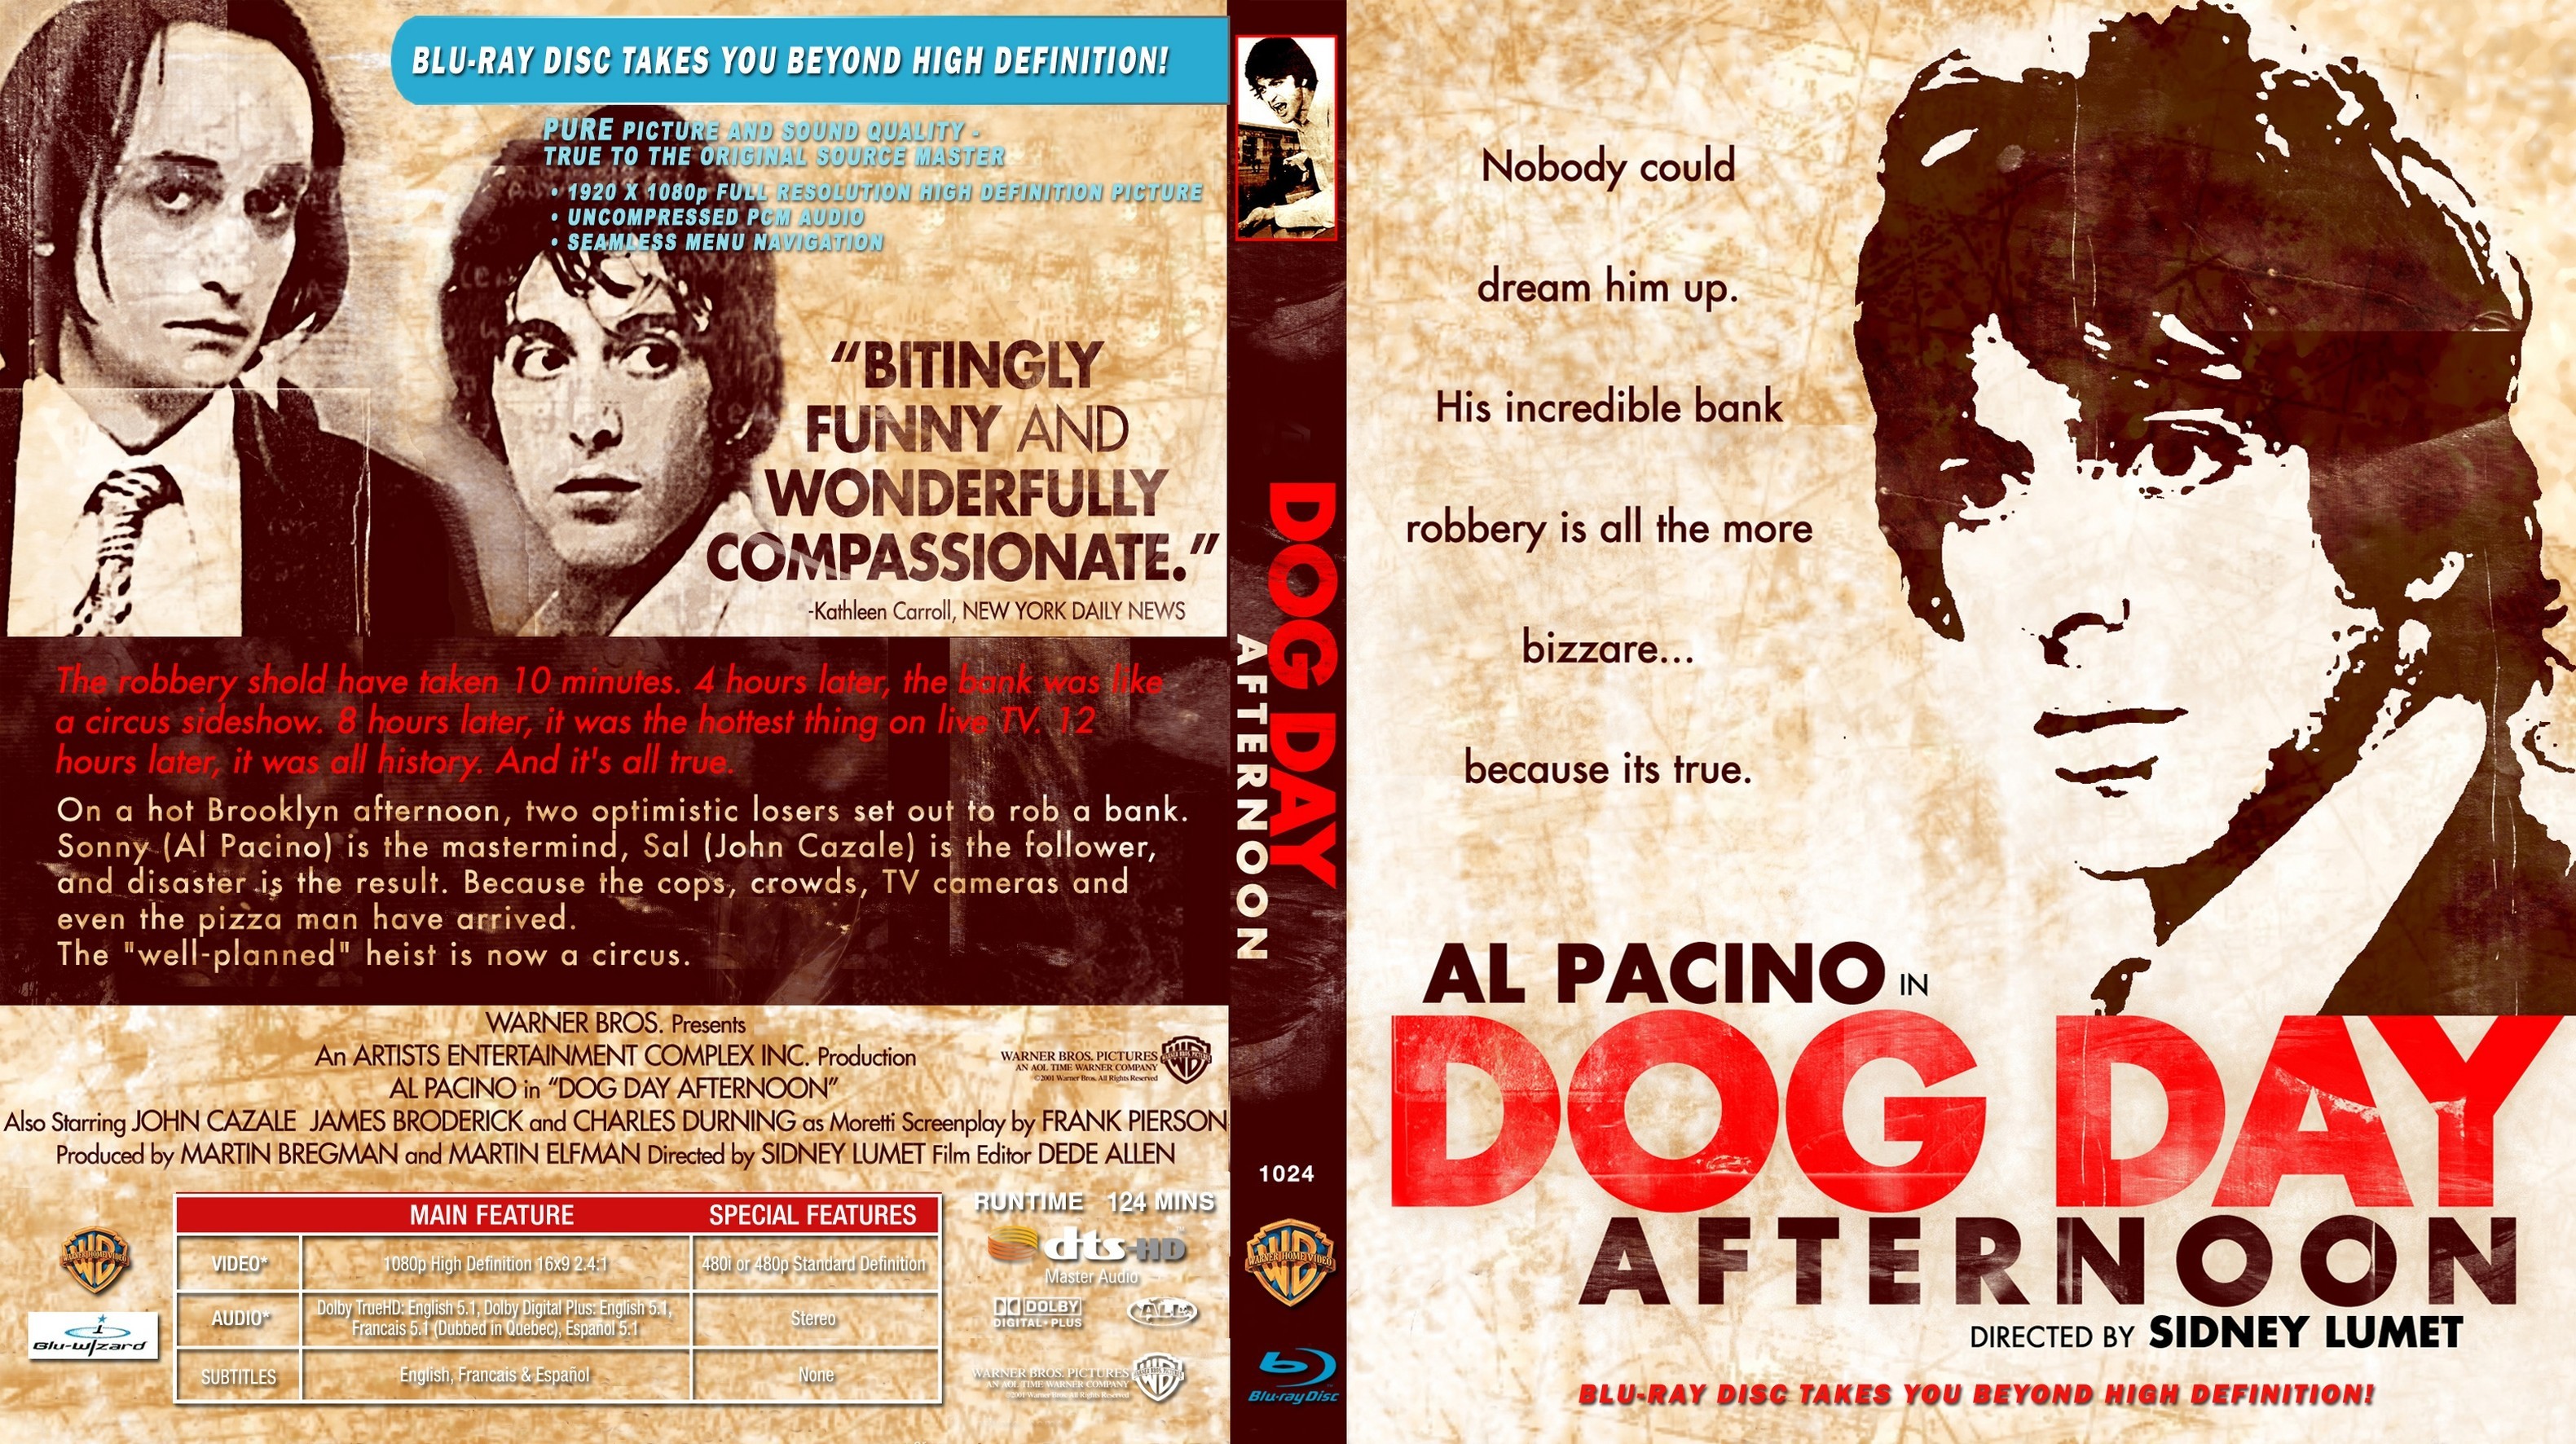 what does a dog day afternoon mean